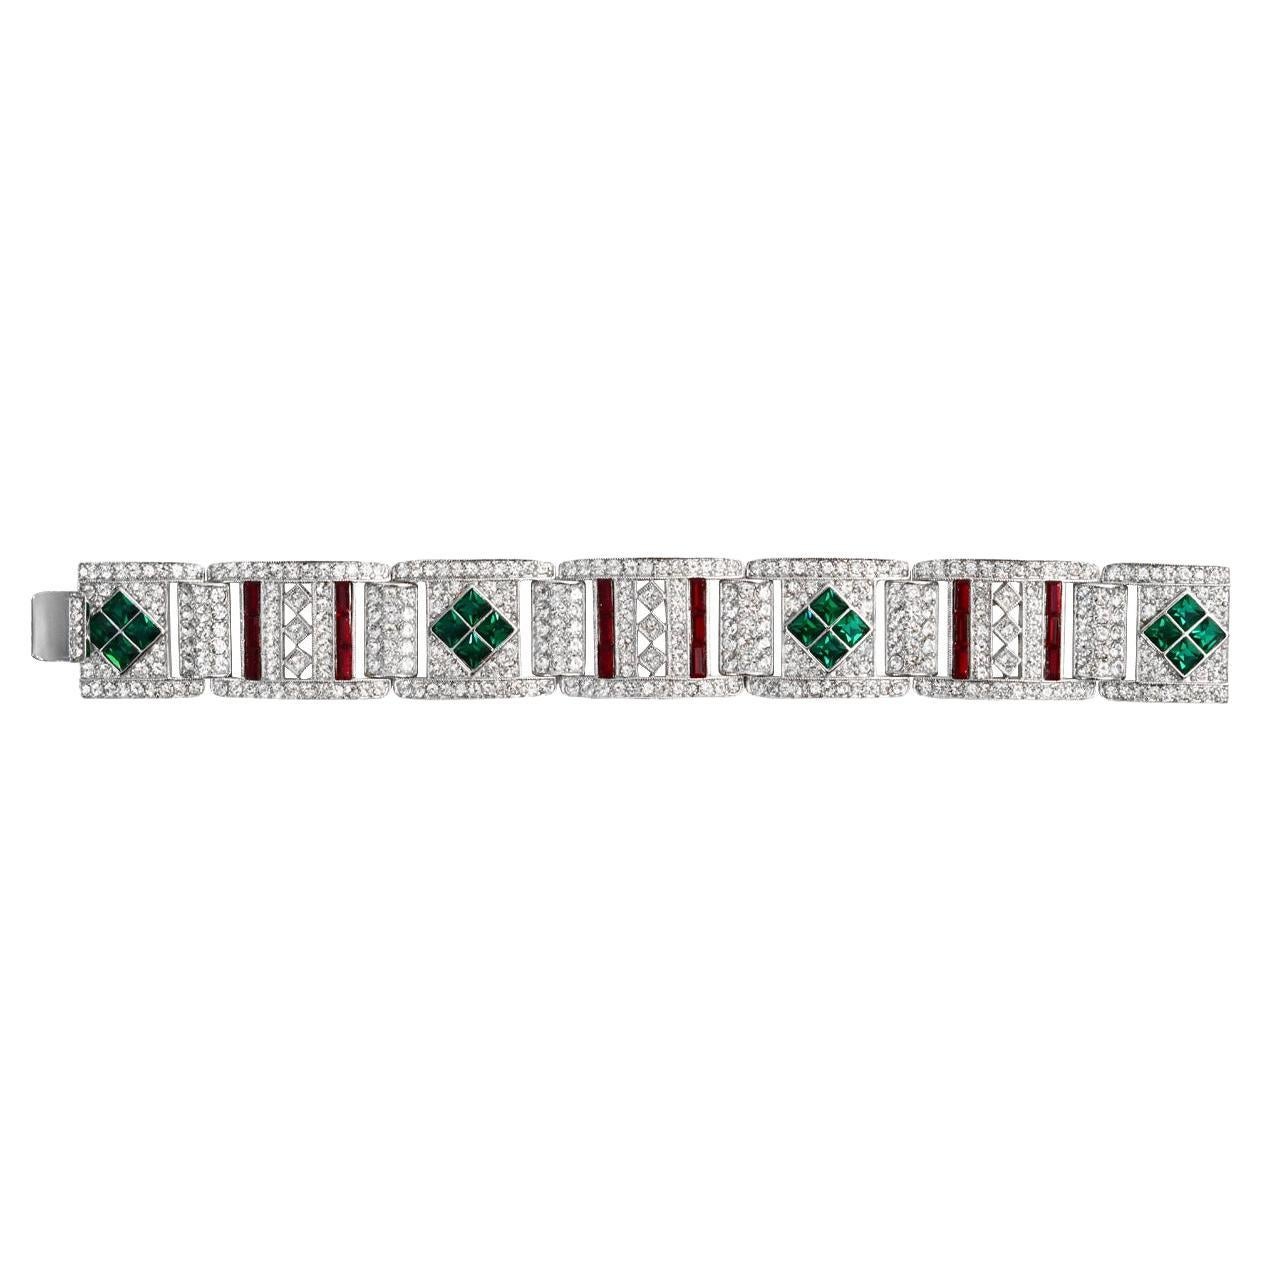 Vintage Art Deco 89 Faux Emerald, Ruby and Crystal Bracelet Circa 1980s